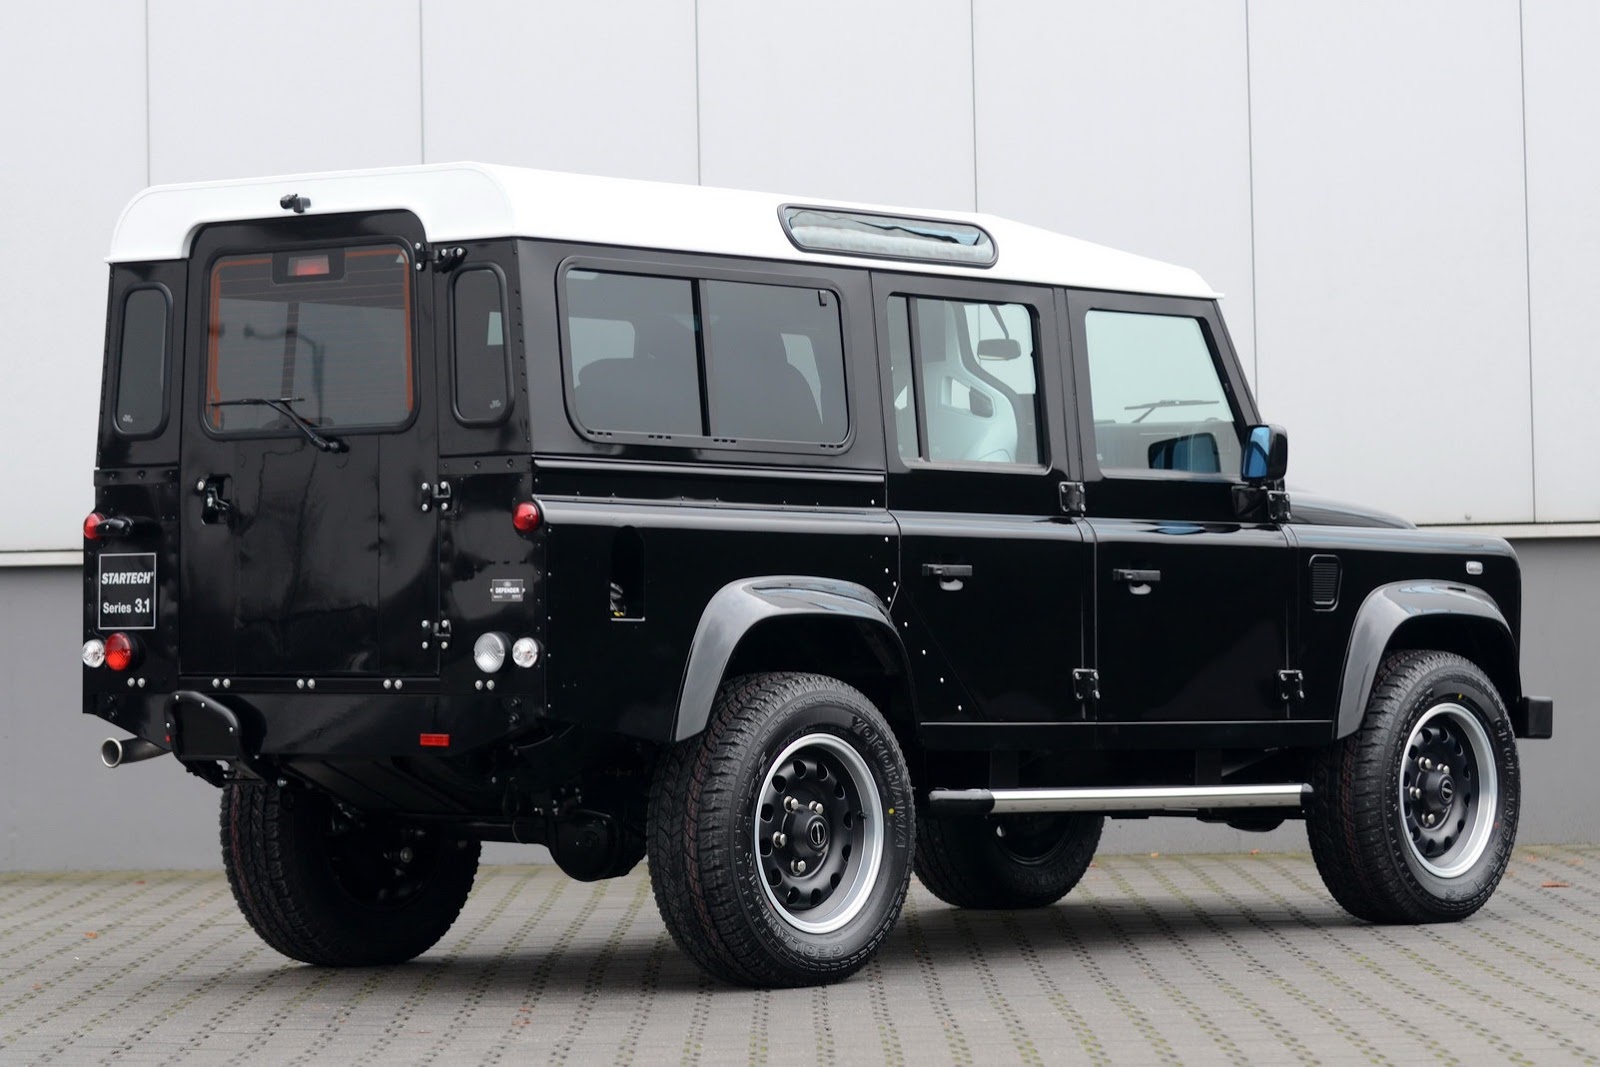 Land Rover Series 3.1 Concept by Startech